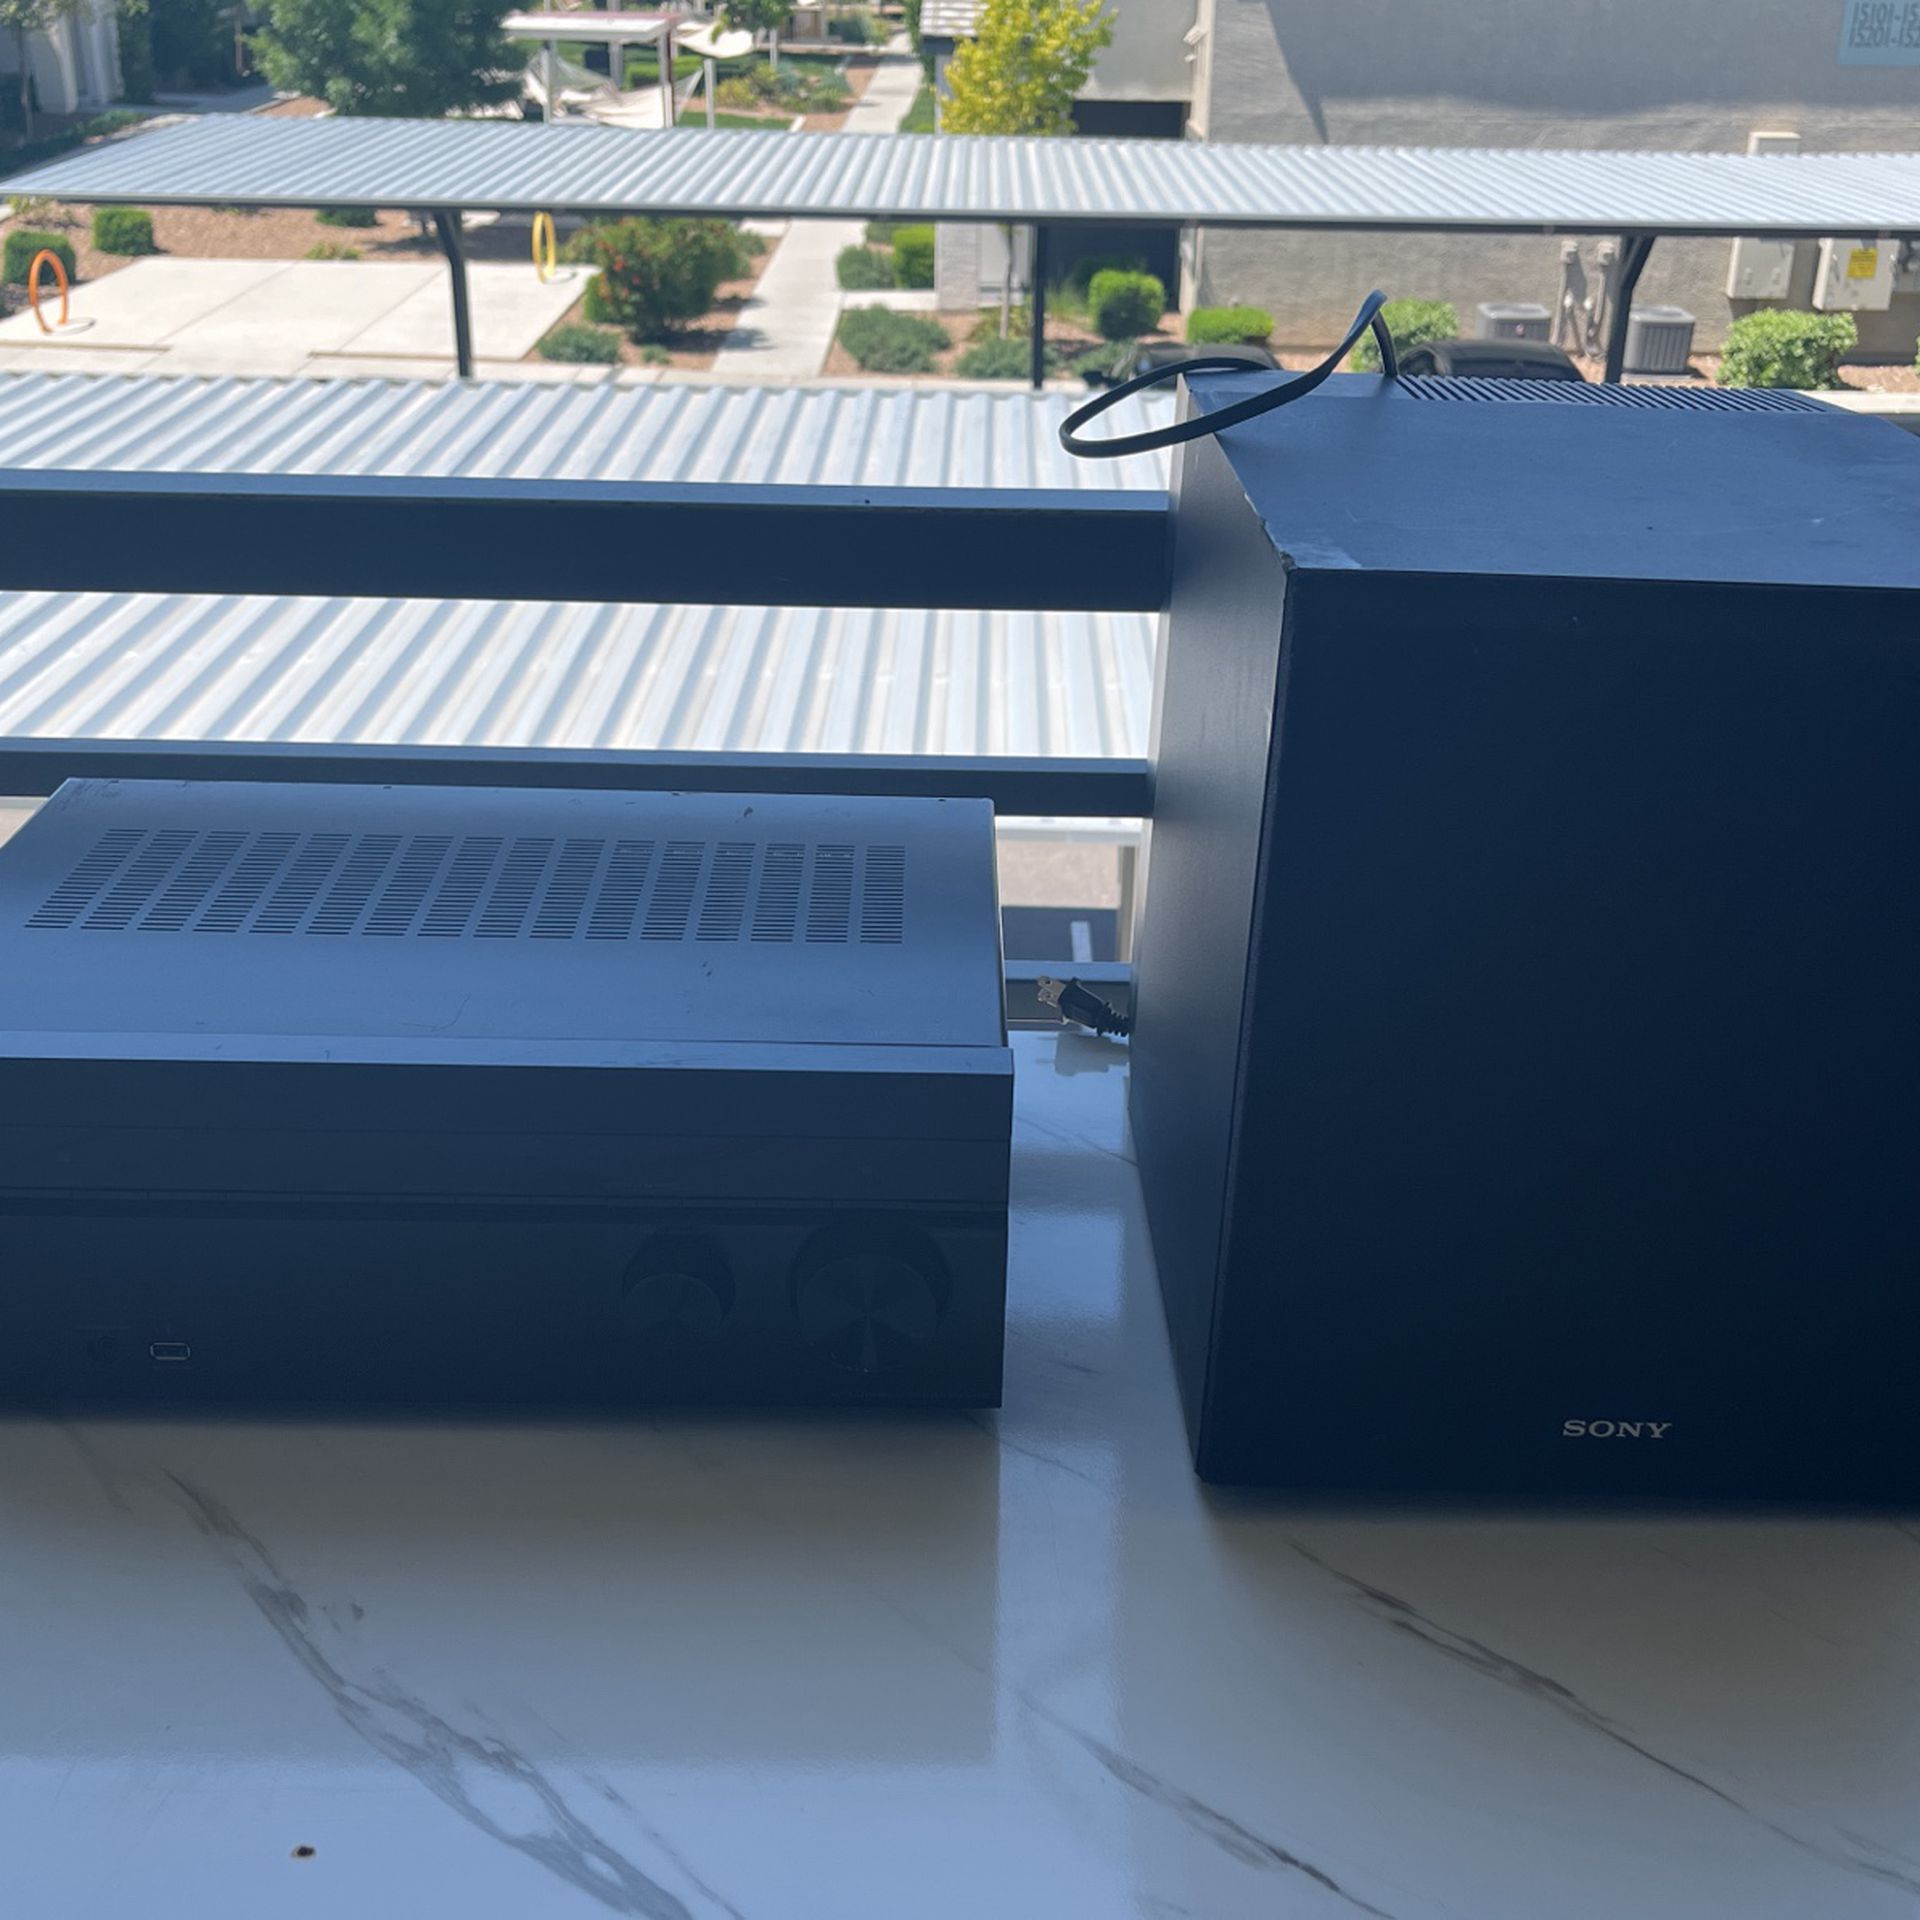 Sony Receiver And Subwoofer And Speakers